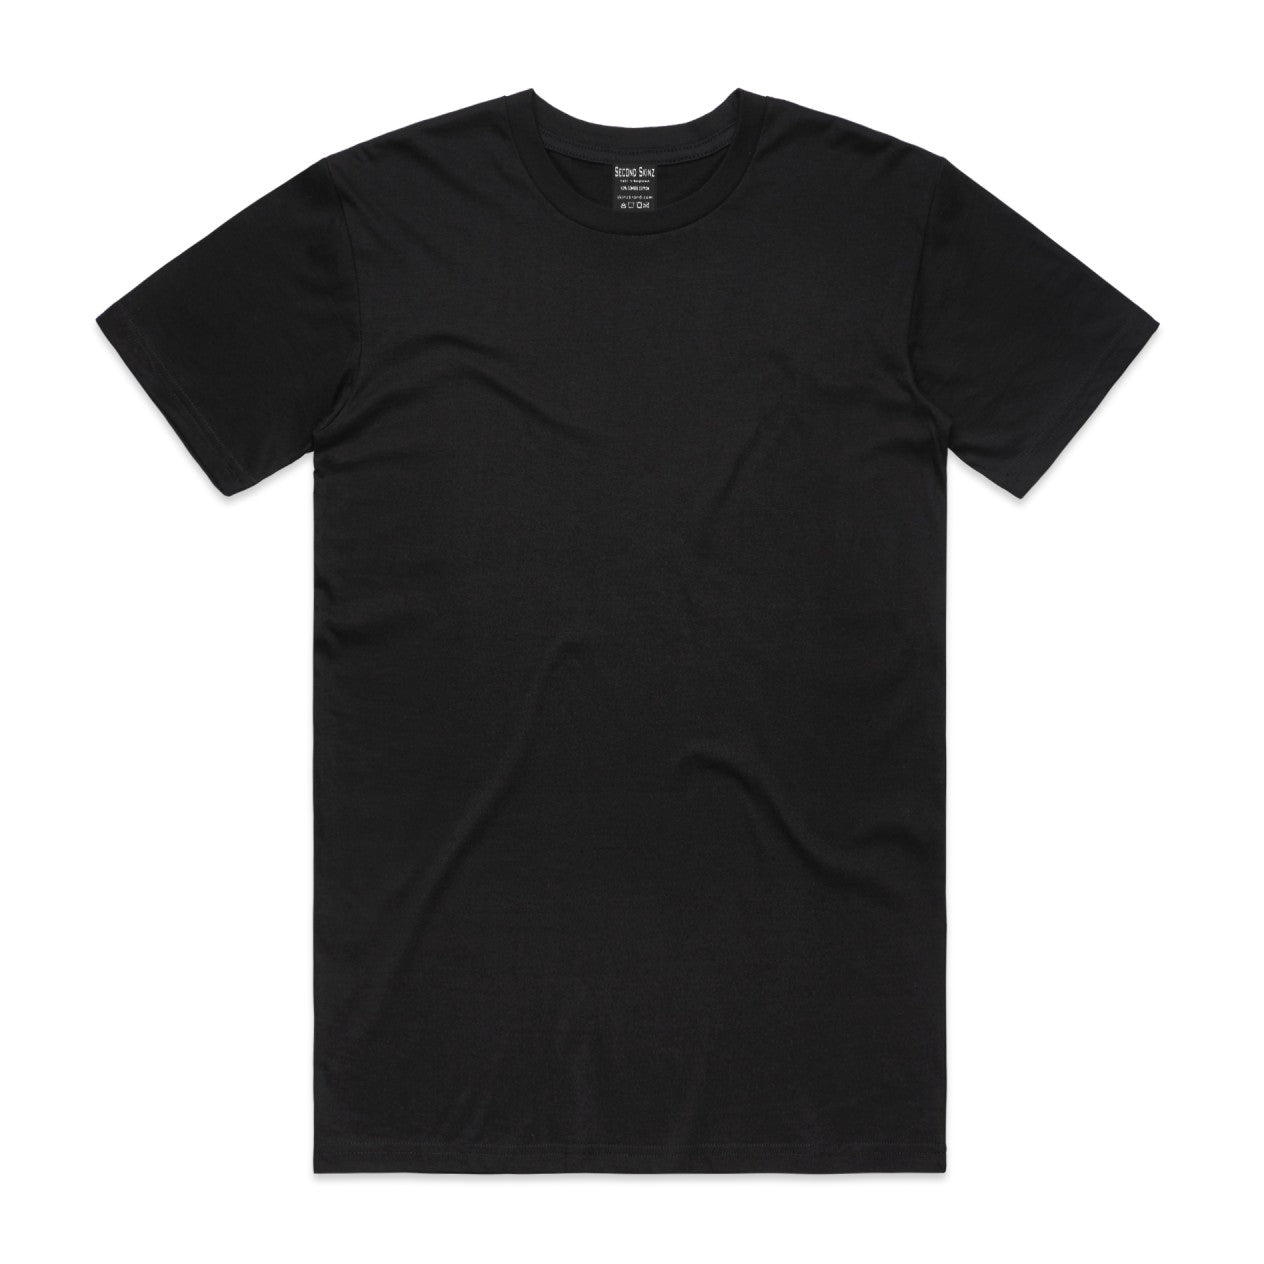 This medium weighted Black Iconic Classic T-Shirt from Second Skinz